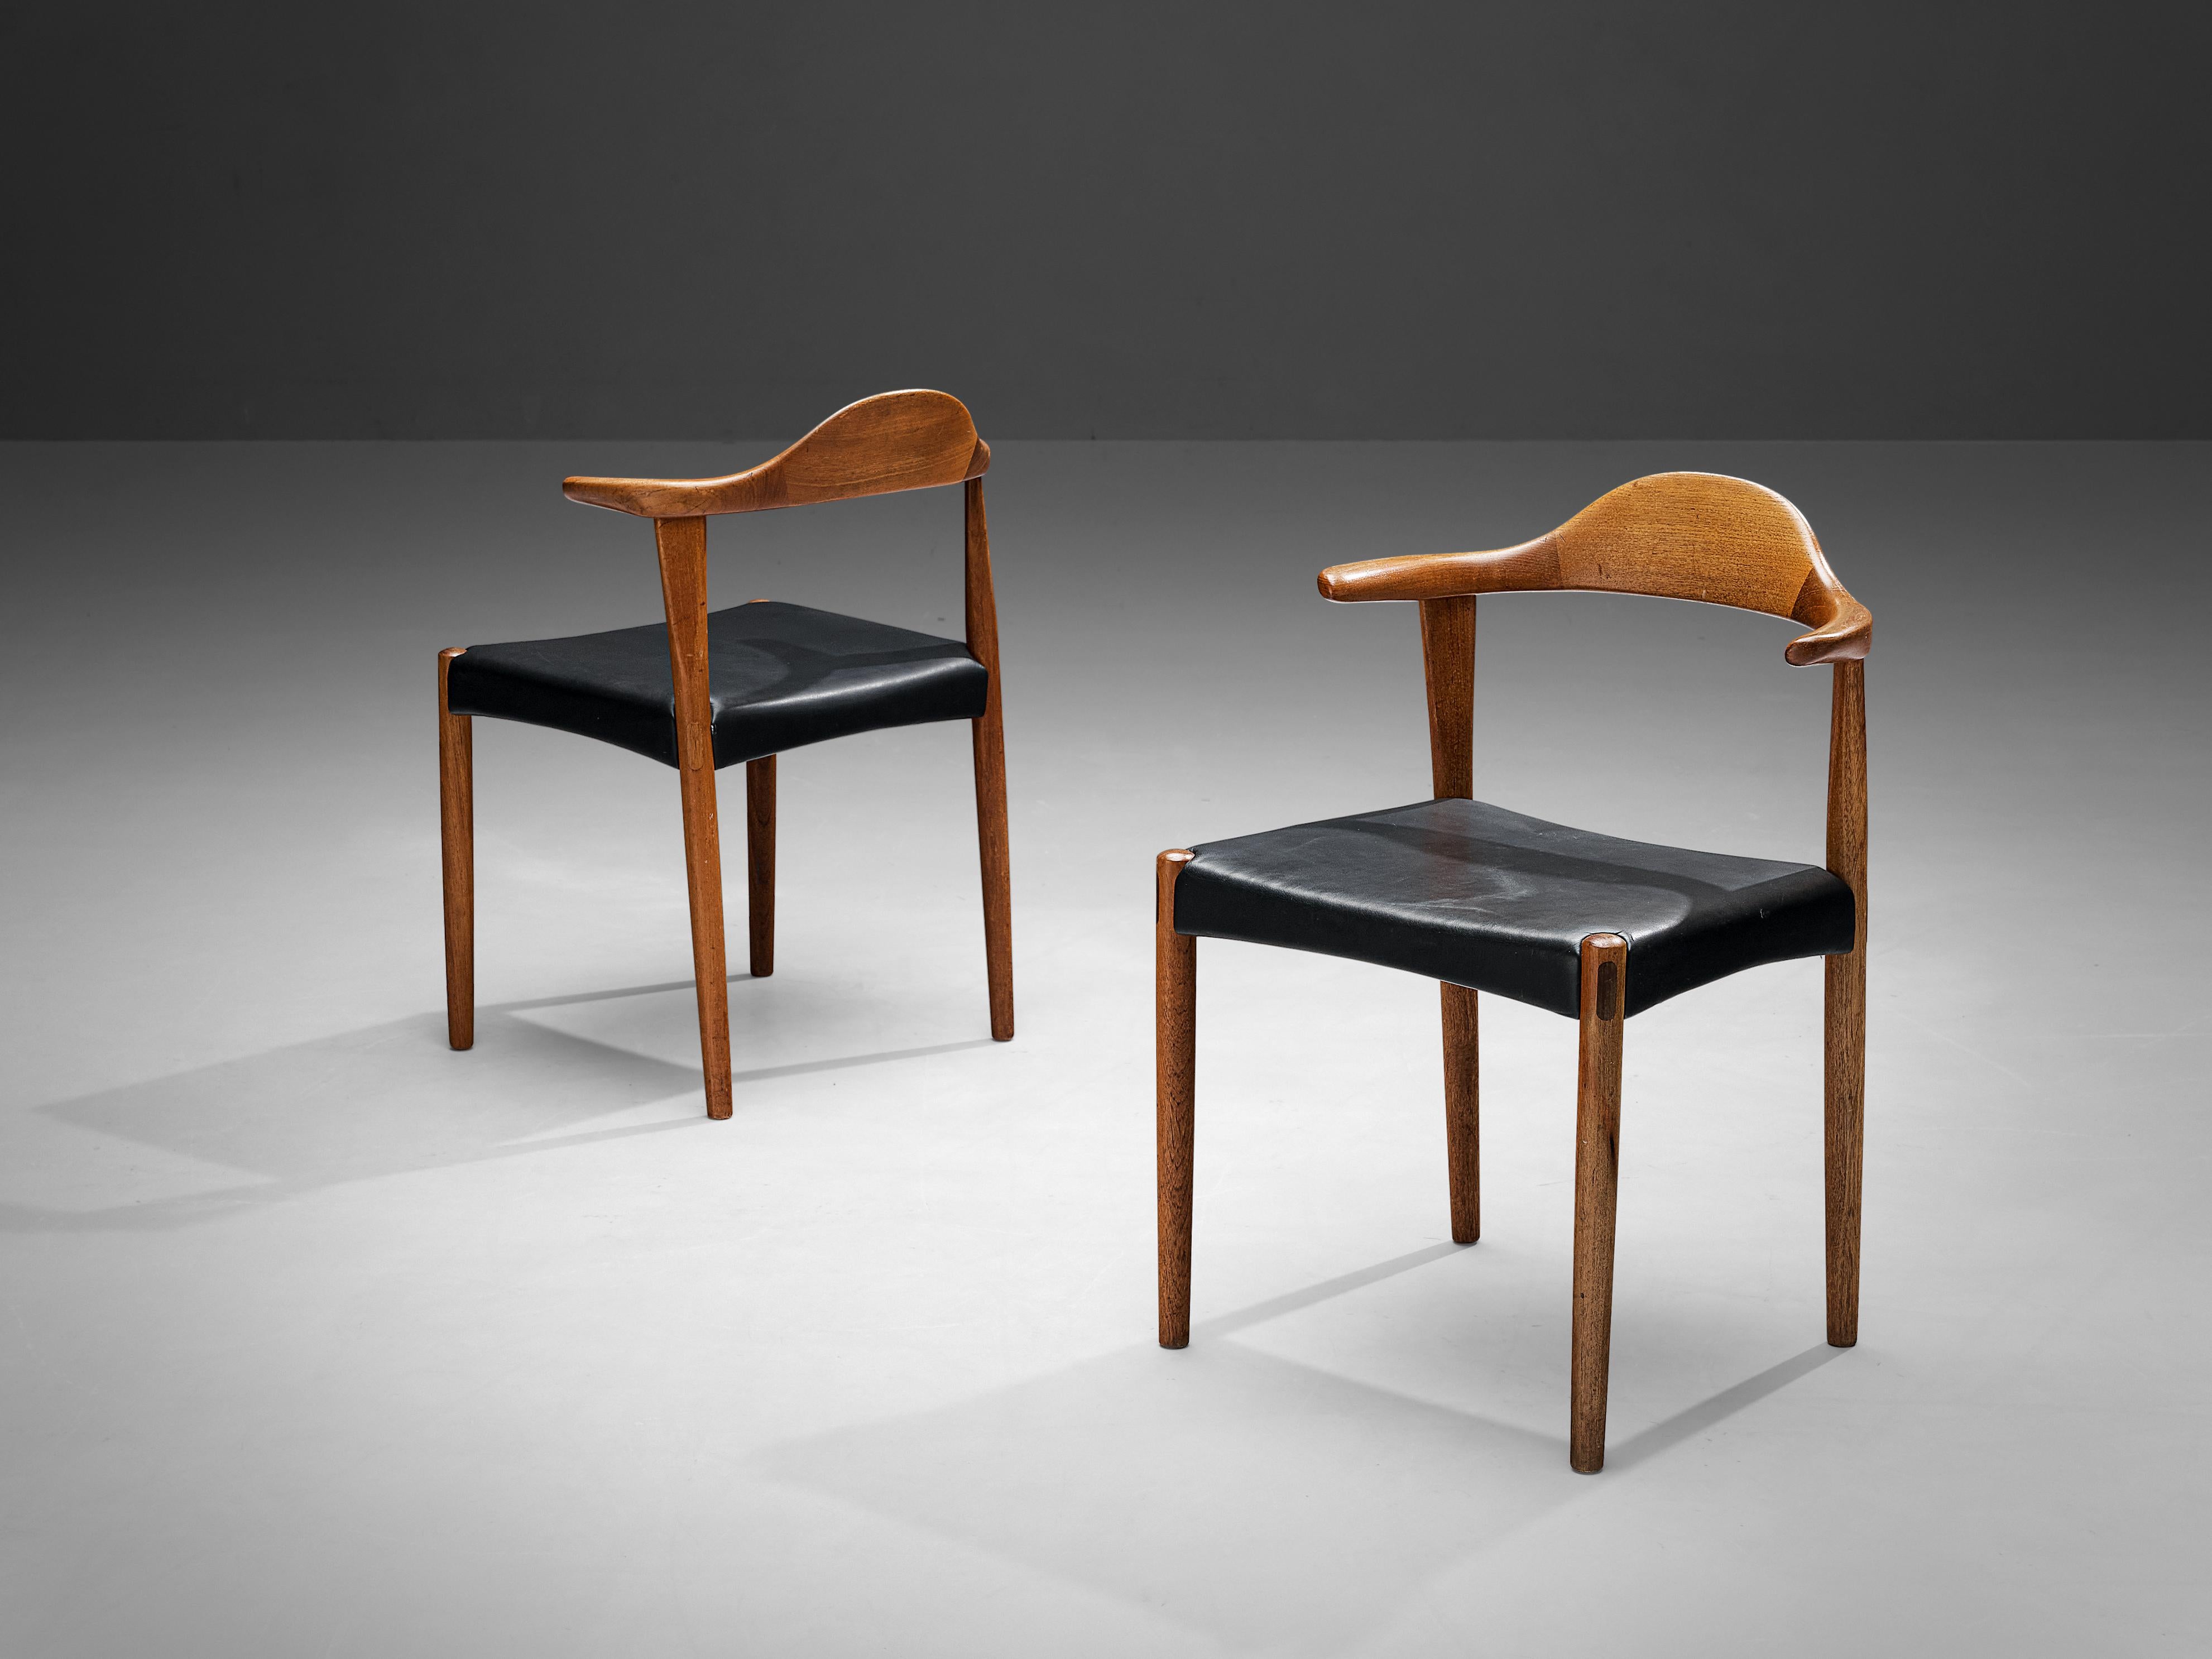 Harry Østergaard for Randers Møbelfabrik, 'Bull Horn' chairs, teak, leatherette, 1950s.

This pair of teak dining chairs with iconic 'Bull Horn' armrests, designed by Harry Østergaard for Randers Møbelfabrik in the 1950s. Constructed of solid teak